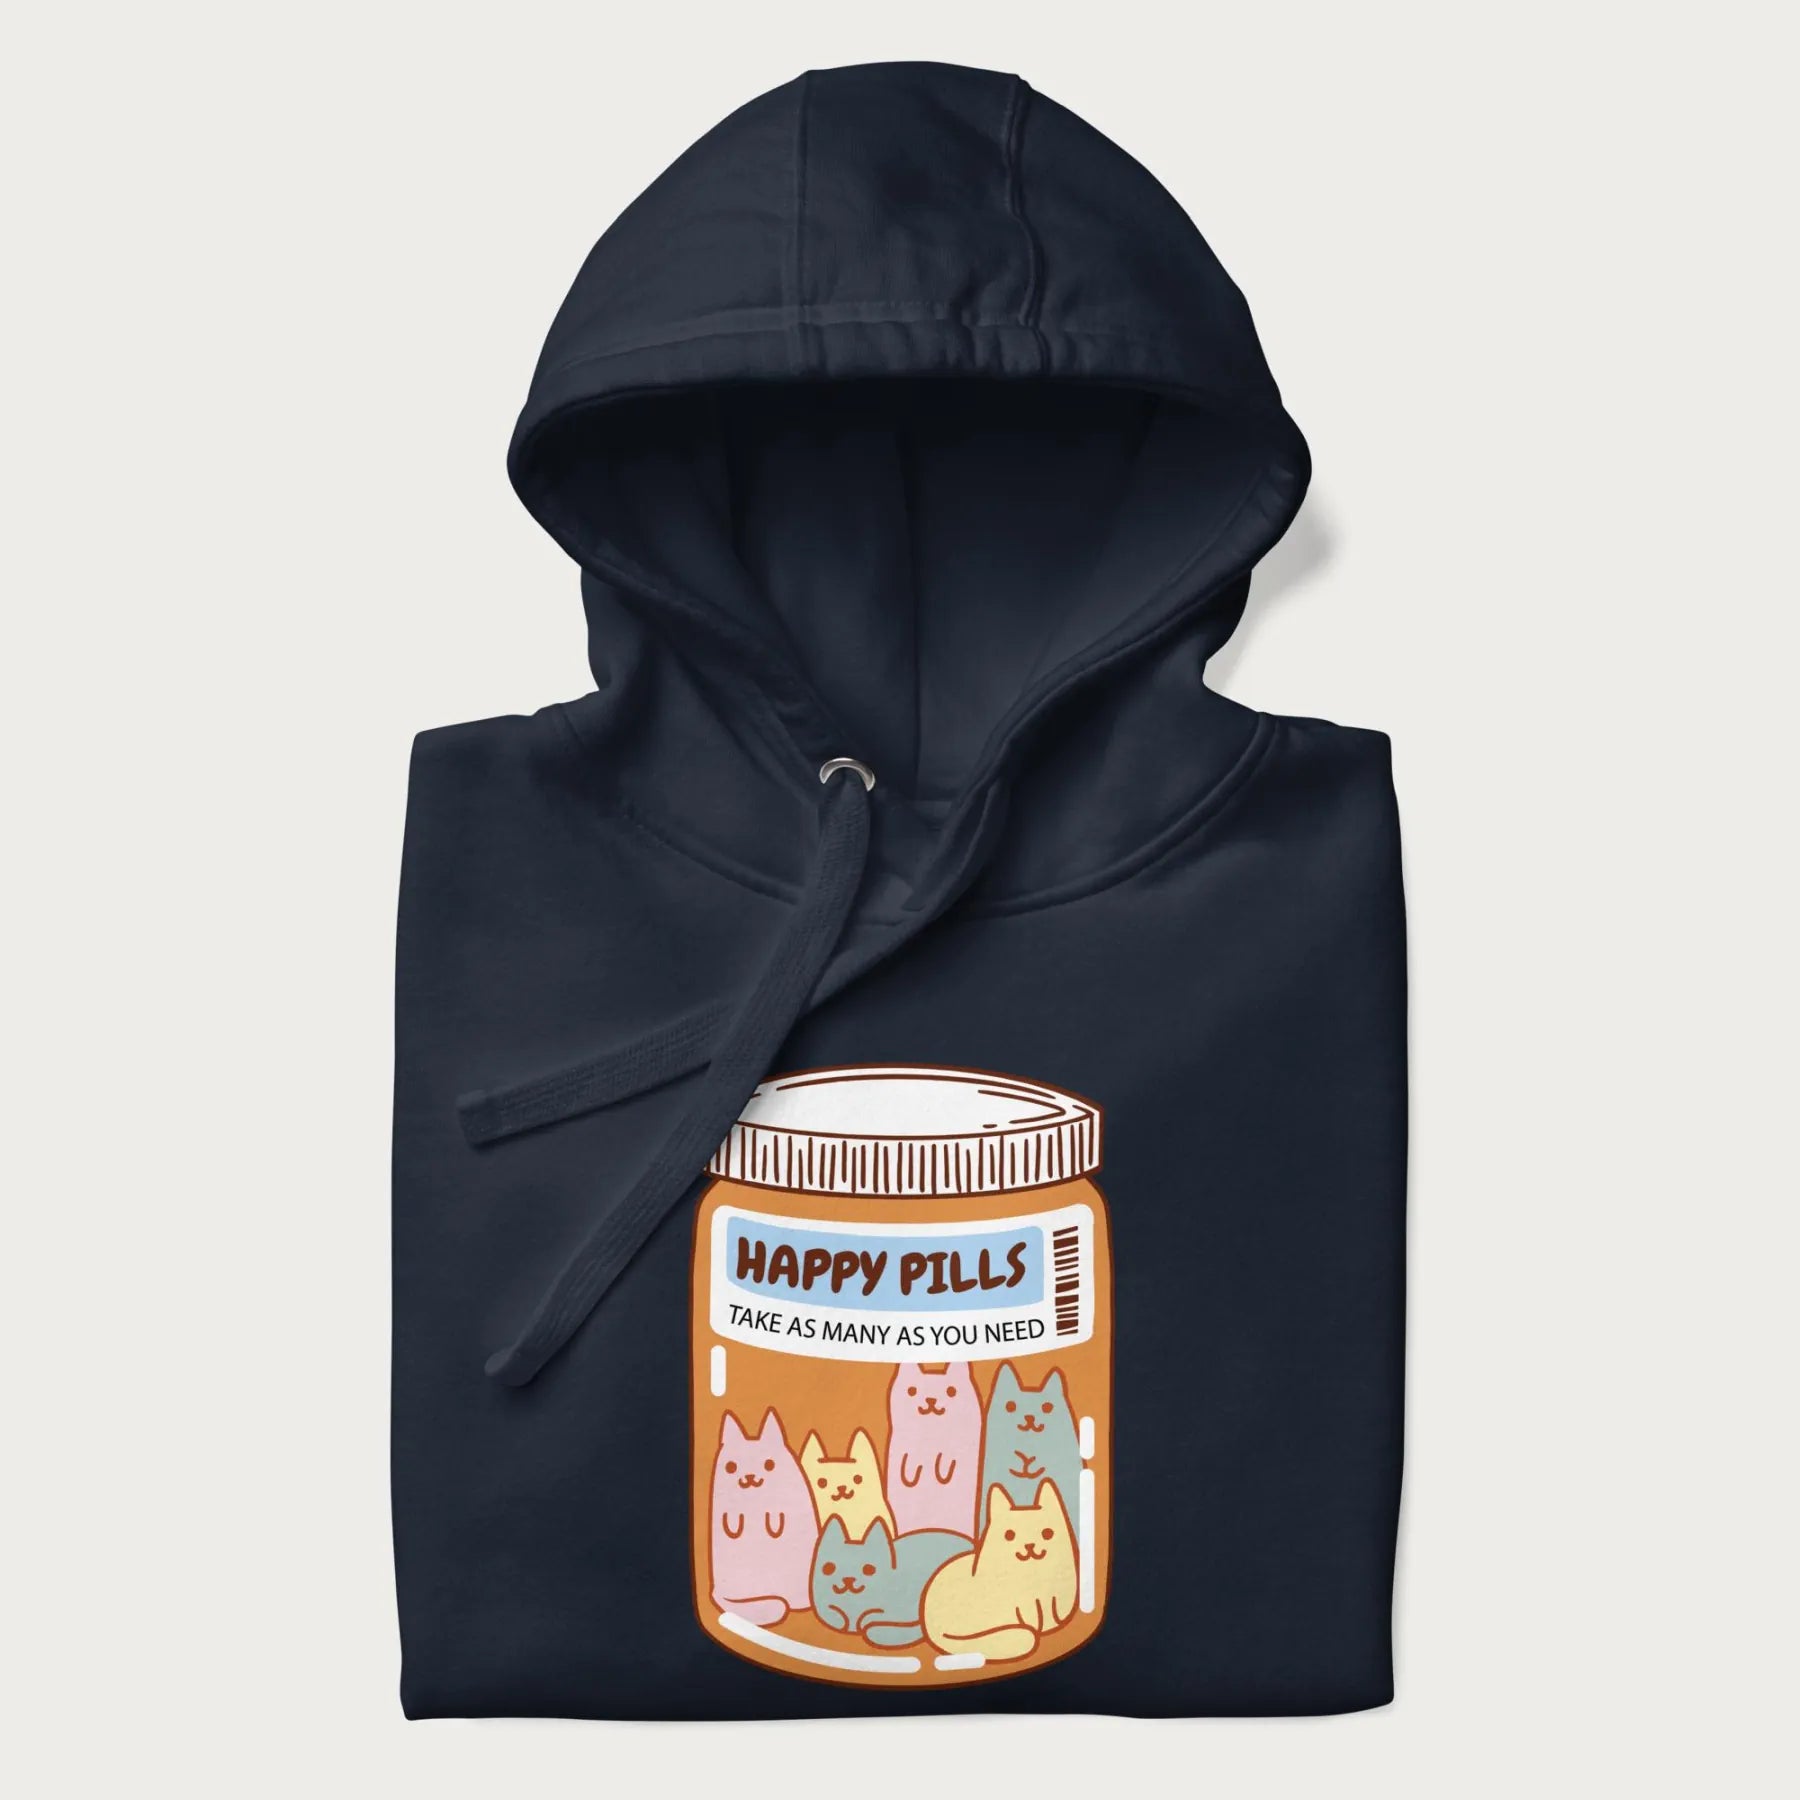 Cartoon cats in a pill bottle labeled 'Happy Pills' on a folded navy blue hoodie.